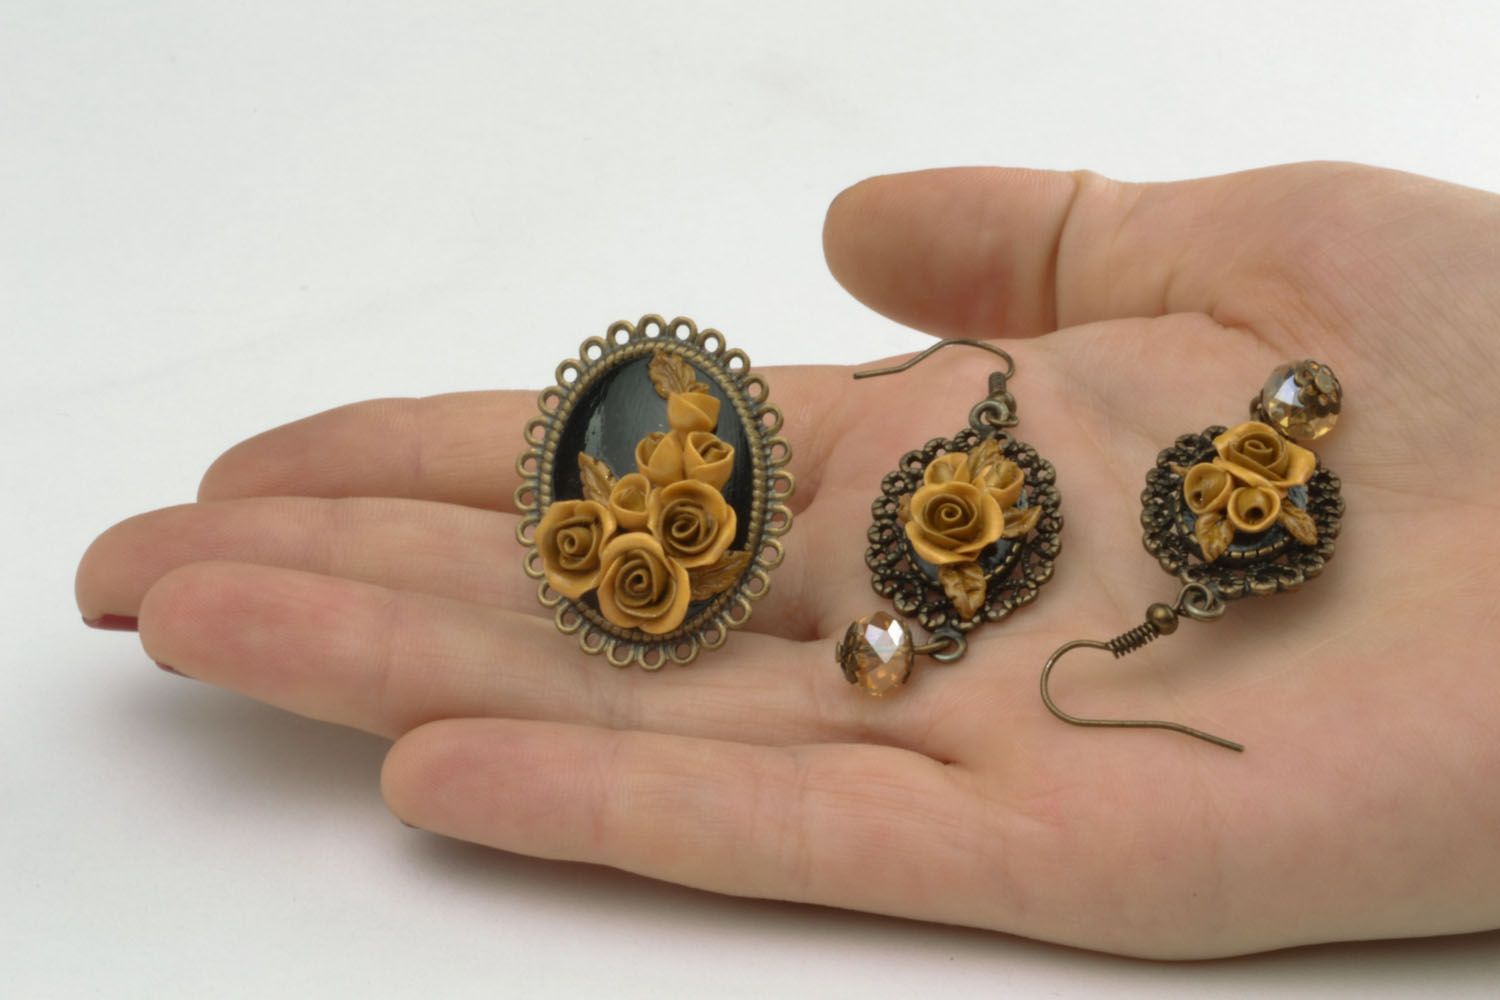 Homemade ring and earrings in vintage style photo 2